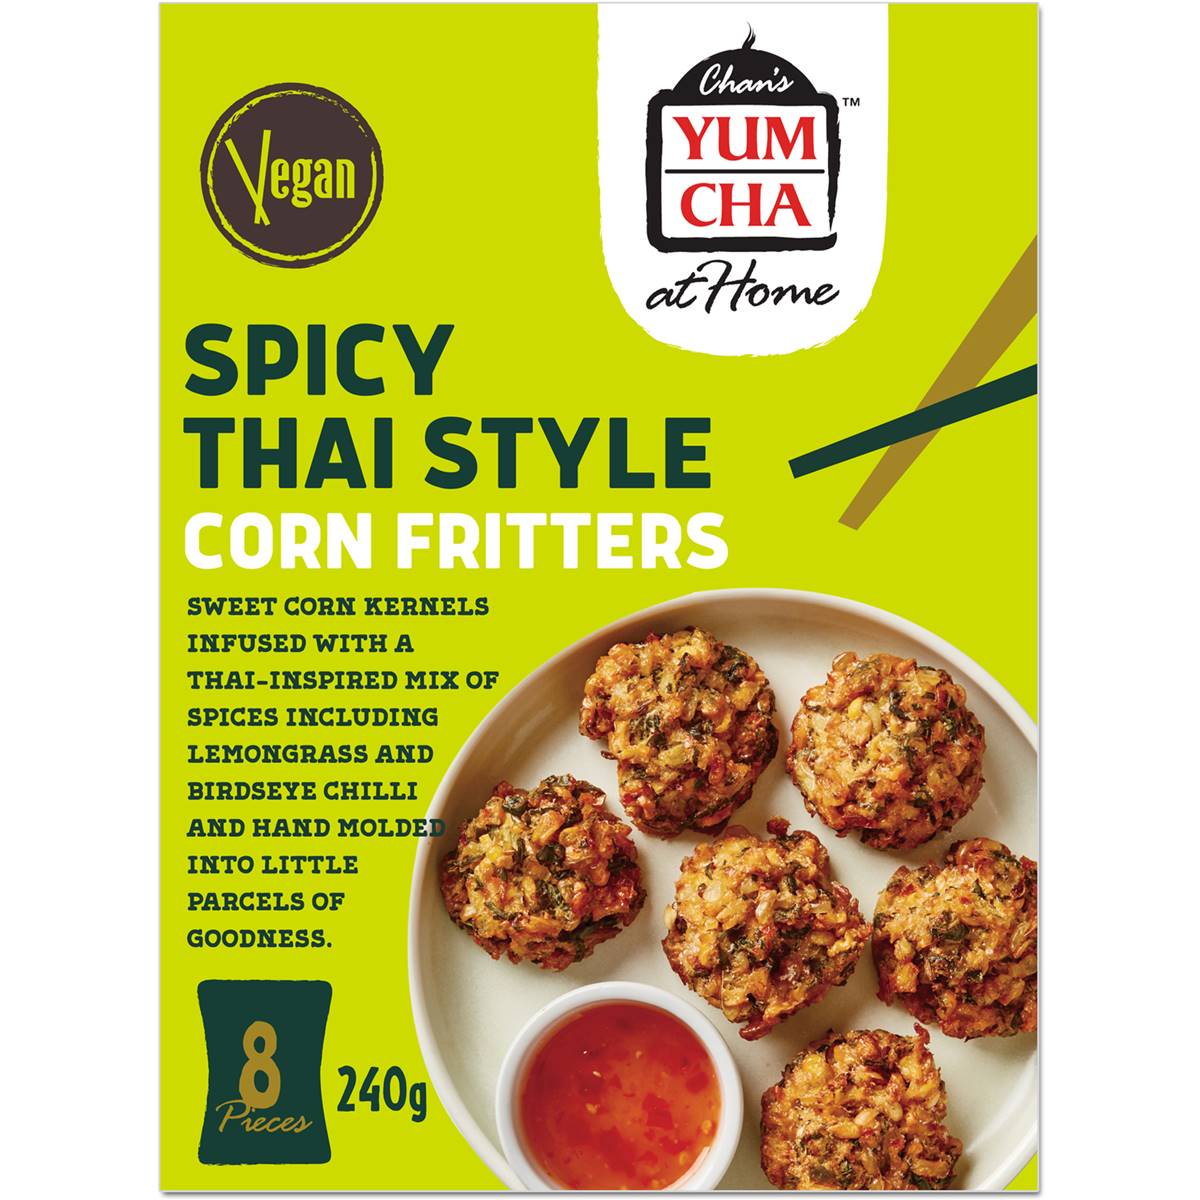 Calories in Chan's Yum Cha Spicy Thai Style Corn Fritters